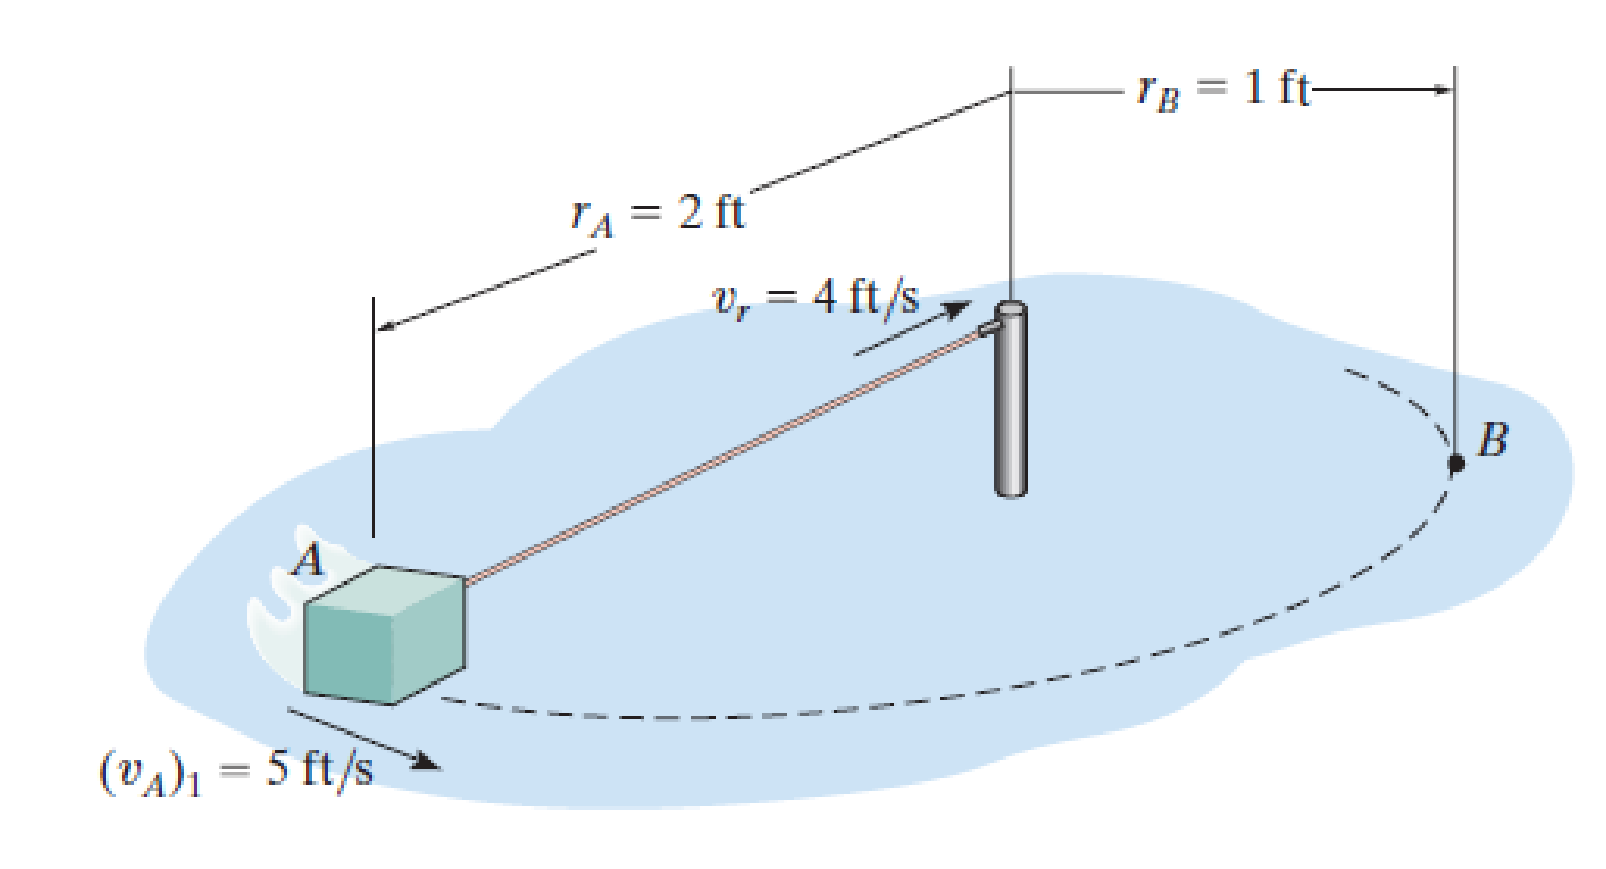 Chapter 15.7, Problem 111P, If the rope is pulled inward with a constant speed of vr = 4 ft/s, determine the speed of the box at 